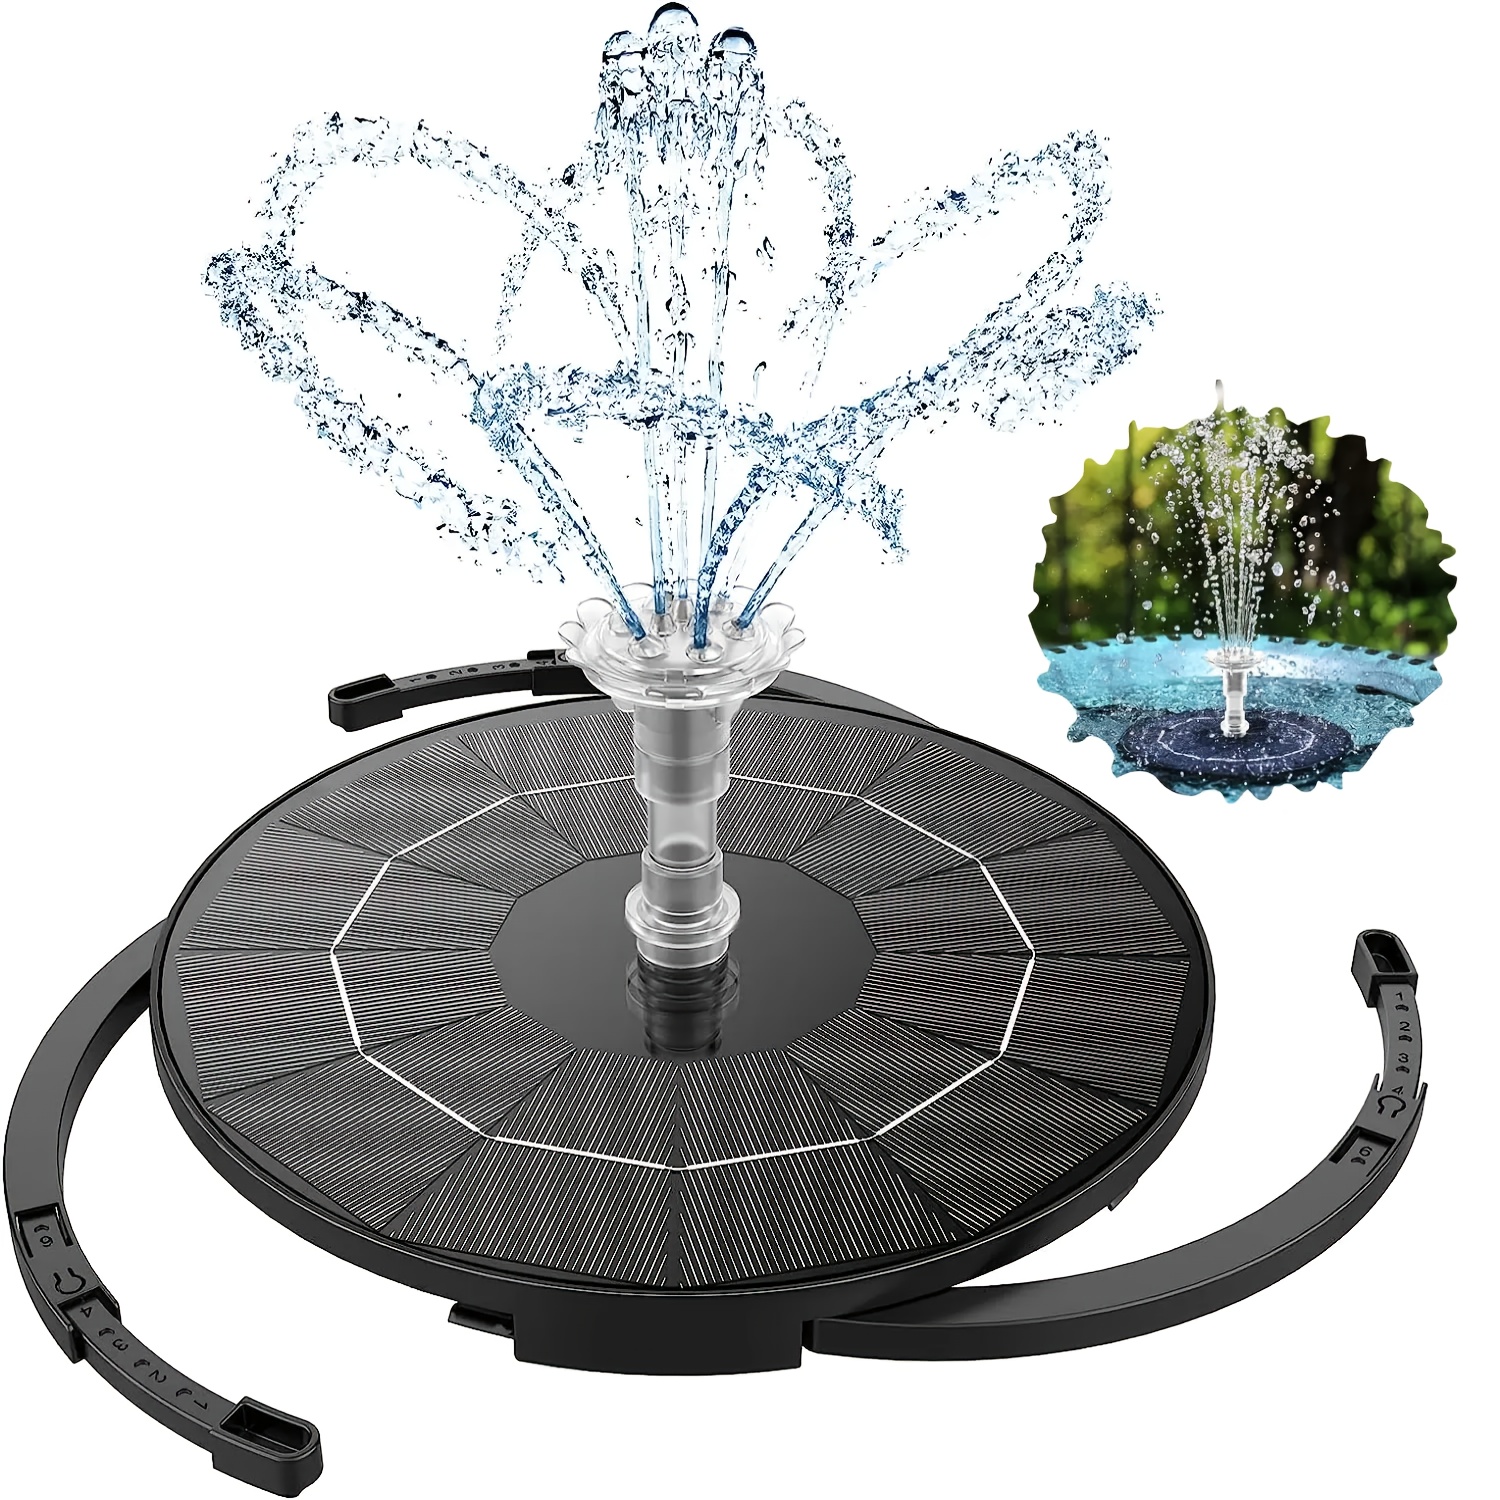 

Solar Bird Bath Fountain 2.8w6.3 Inch Diy With 8 Nozzles And Brackets, Equipped With A 1.2 Meter Long Power Cord Suitable For Bird Baths, Gardens, Swimming Pools, Aquariums, And Outdoor Courtyards